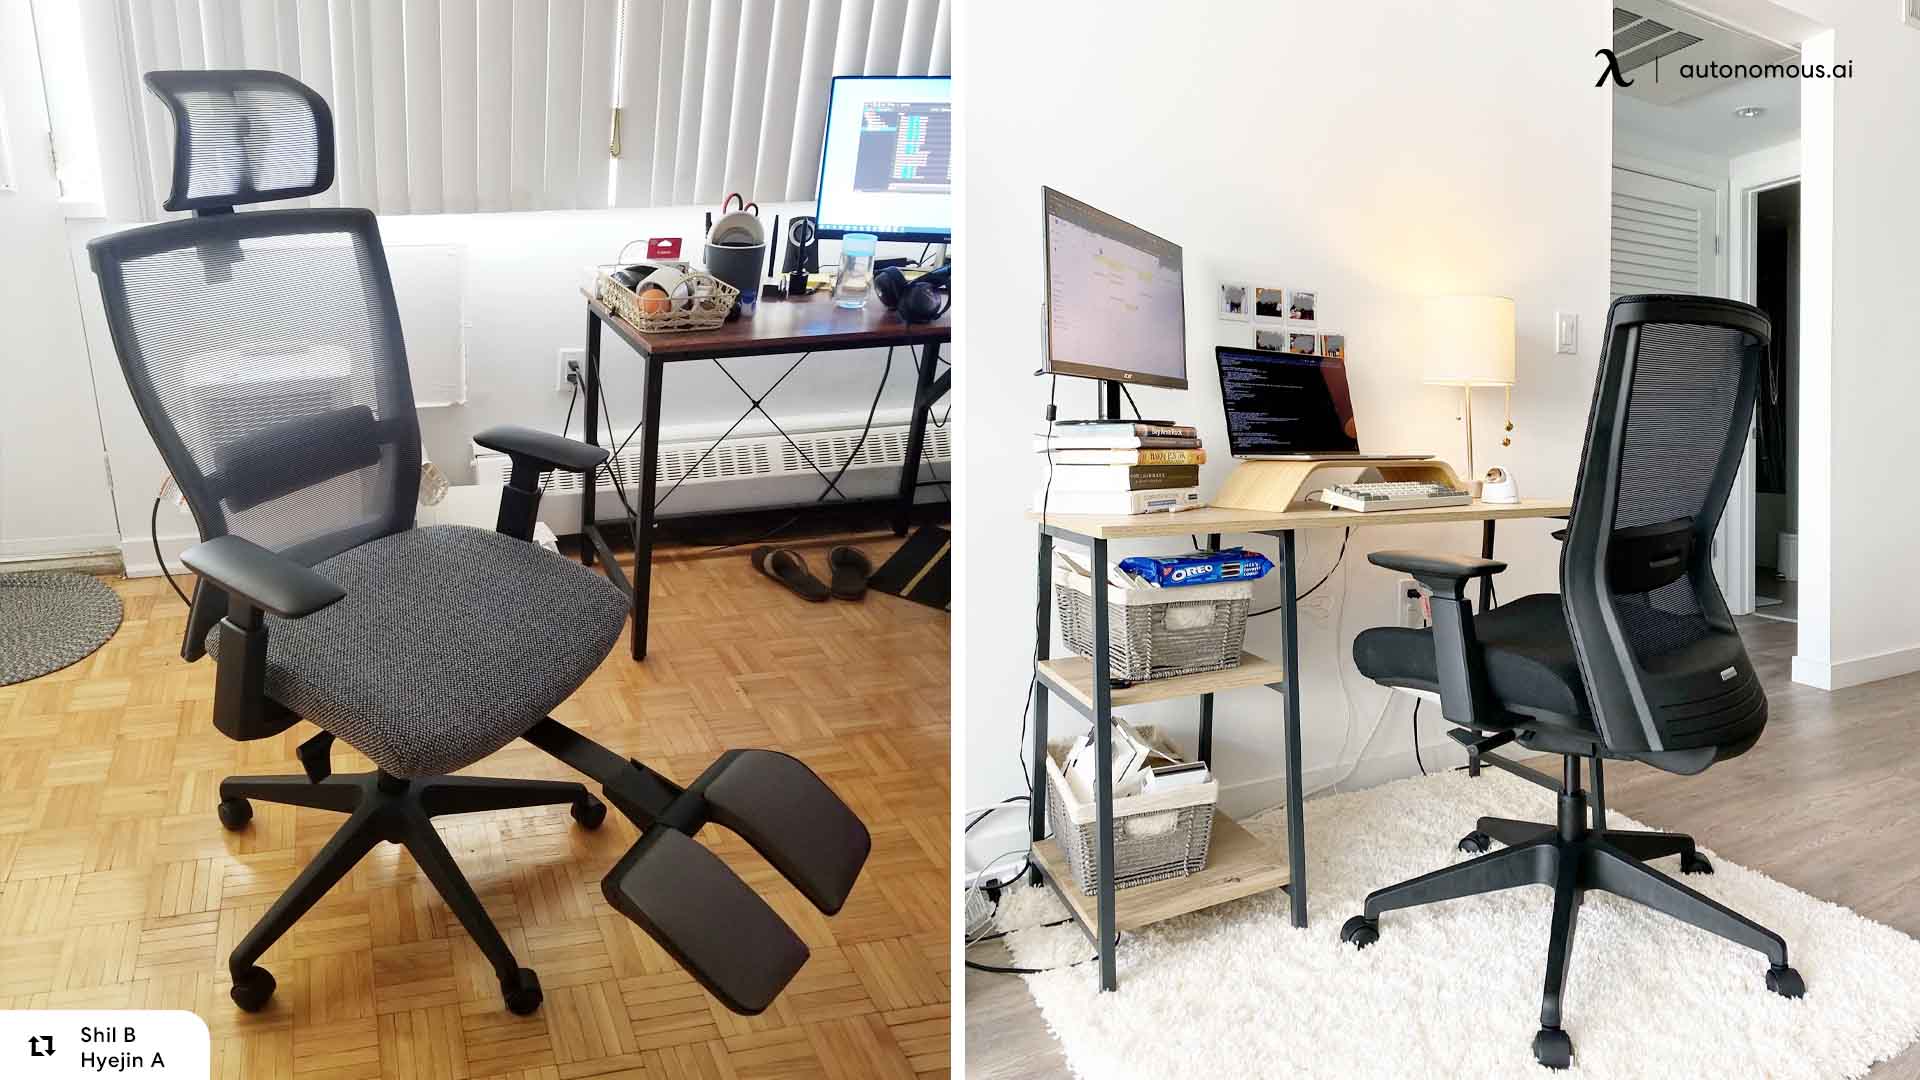 Benefits of Footrests for Ergonomic Chairs